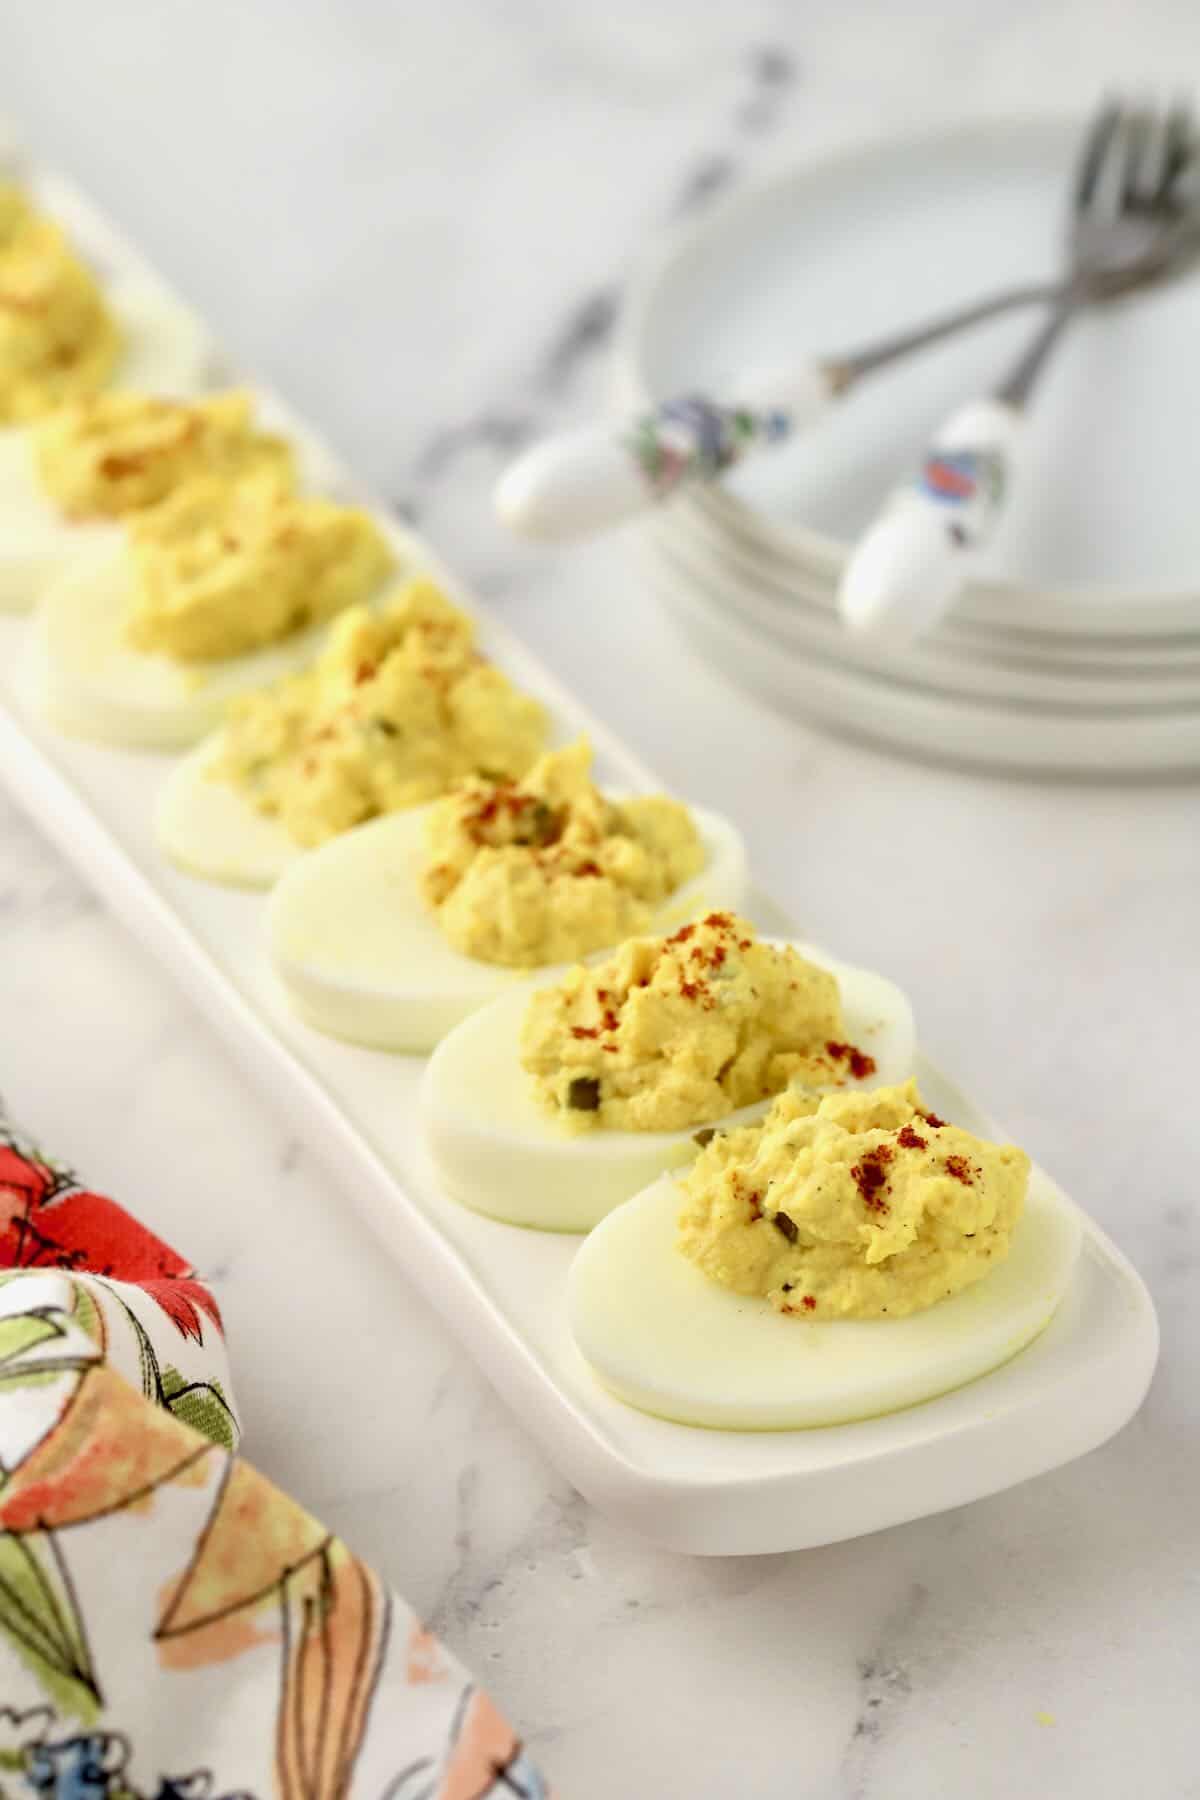 Deviled eggs topped with paprika on a long deviled egg holder.